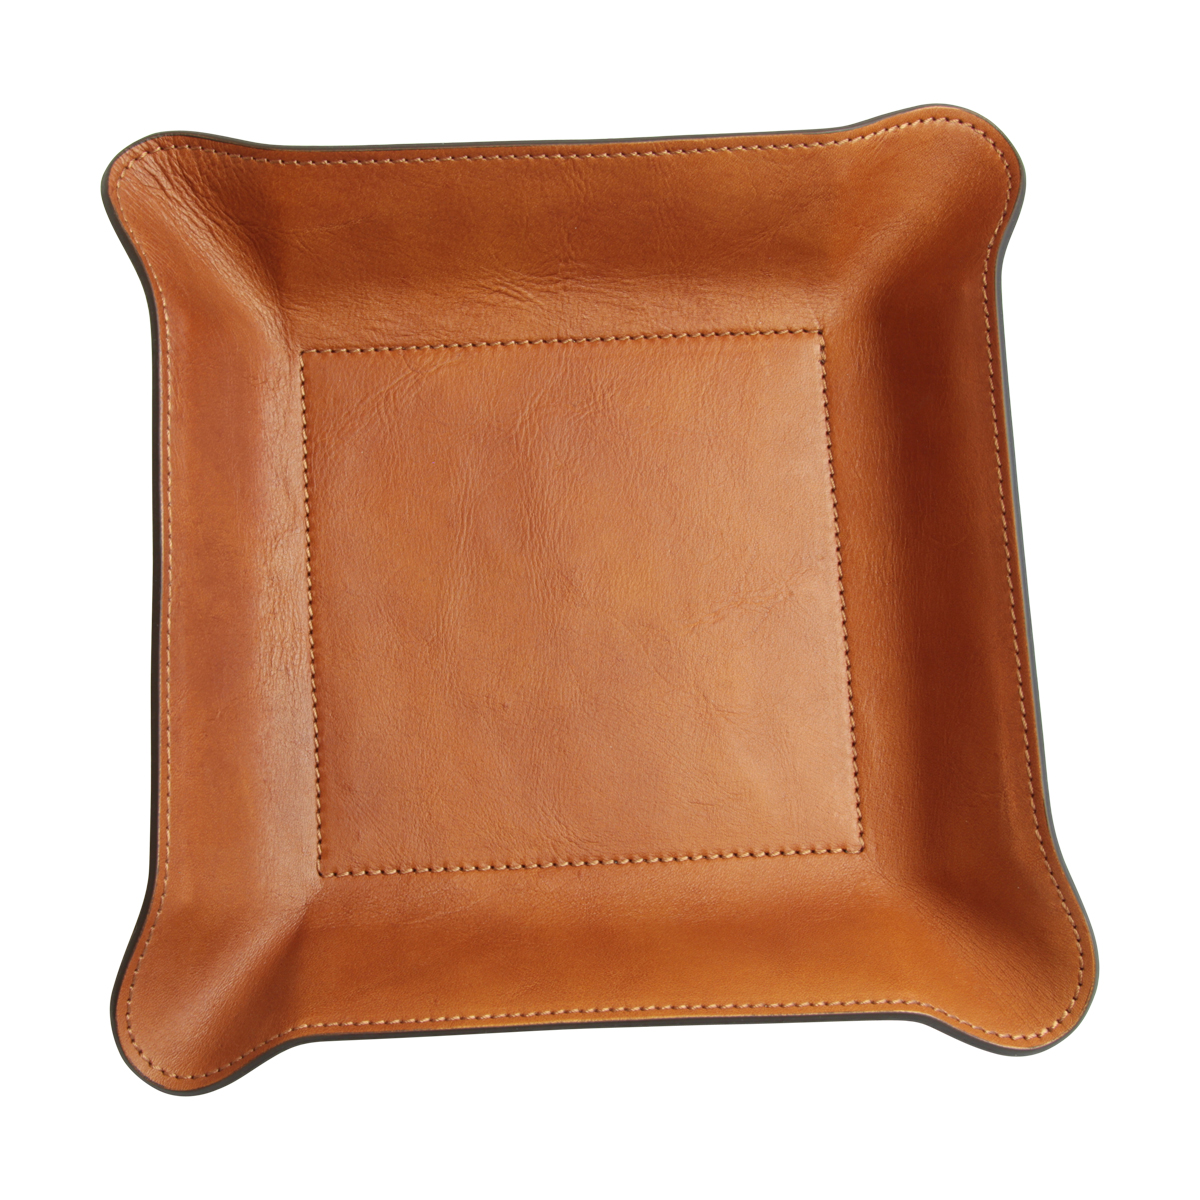 Leather Catchall Tray - Colonial Brown | 751089CO | EURO | Old Angler Firenze